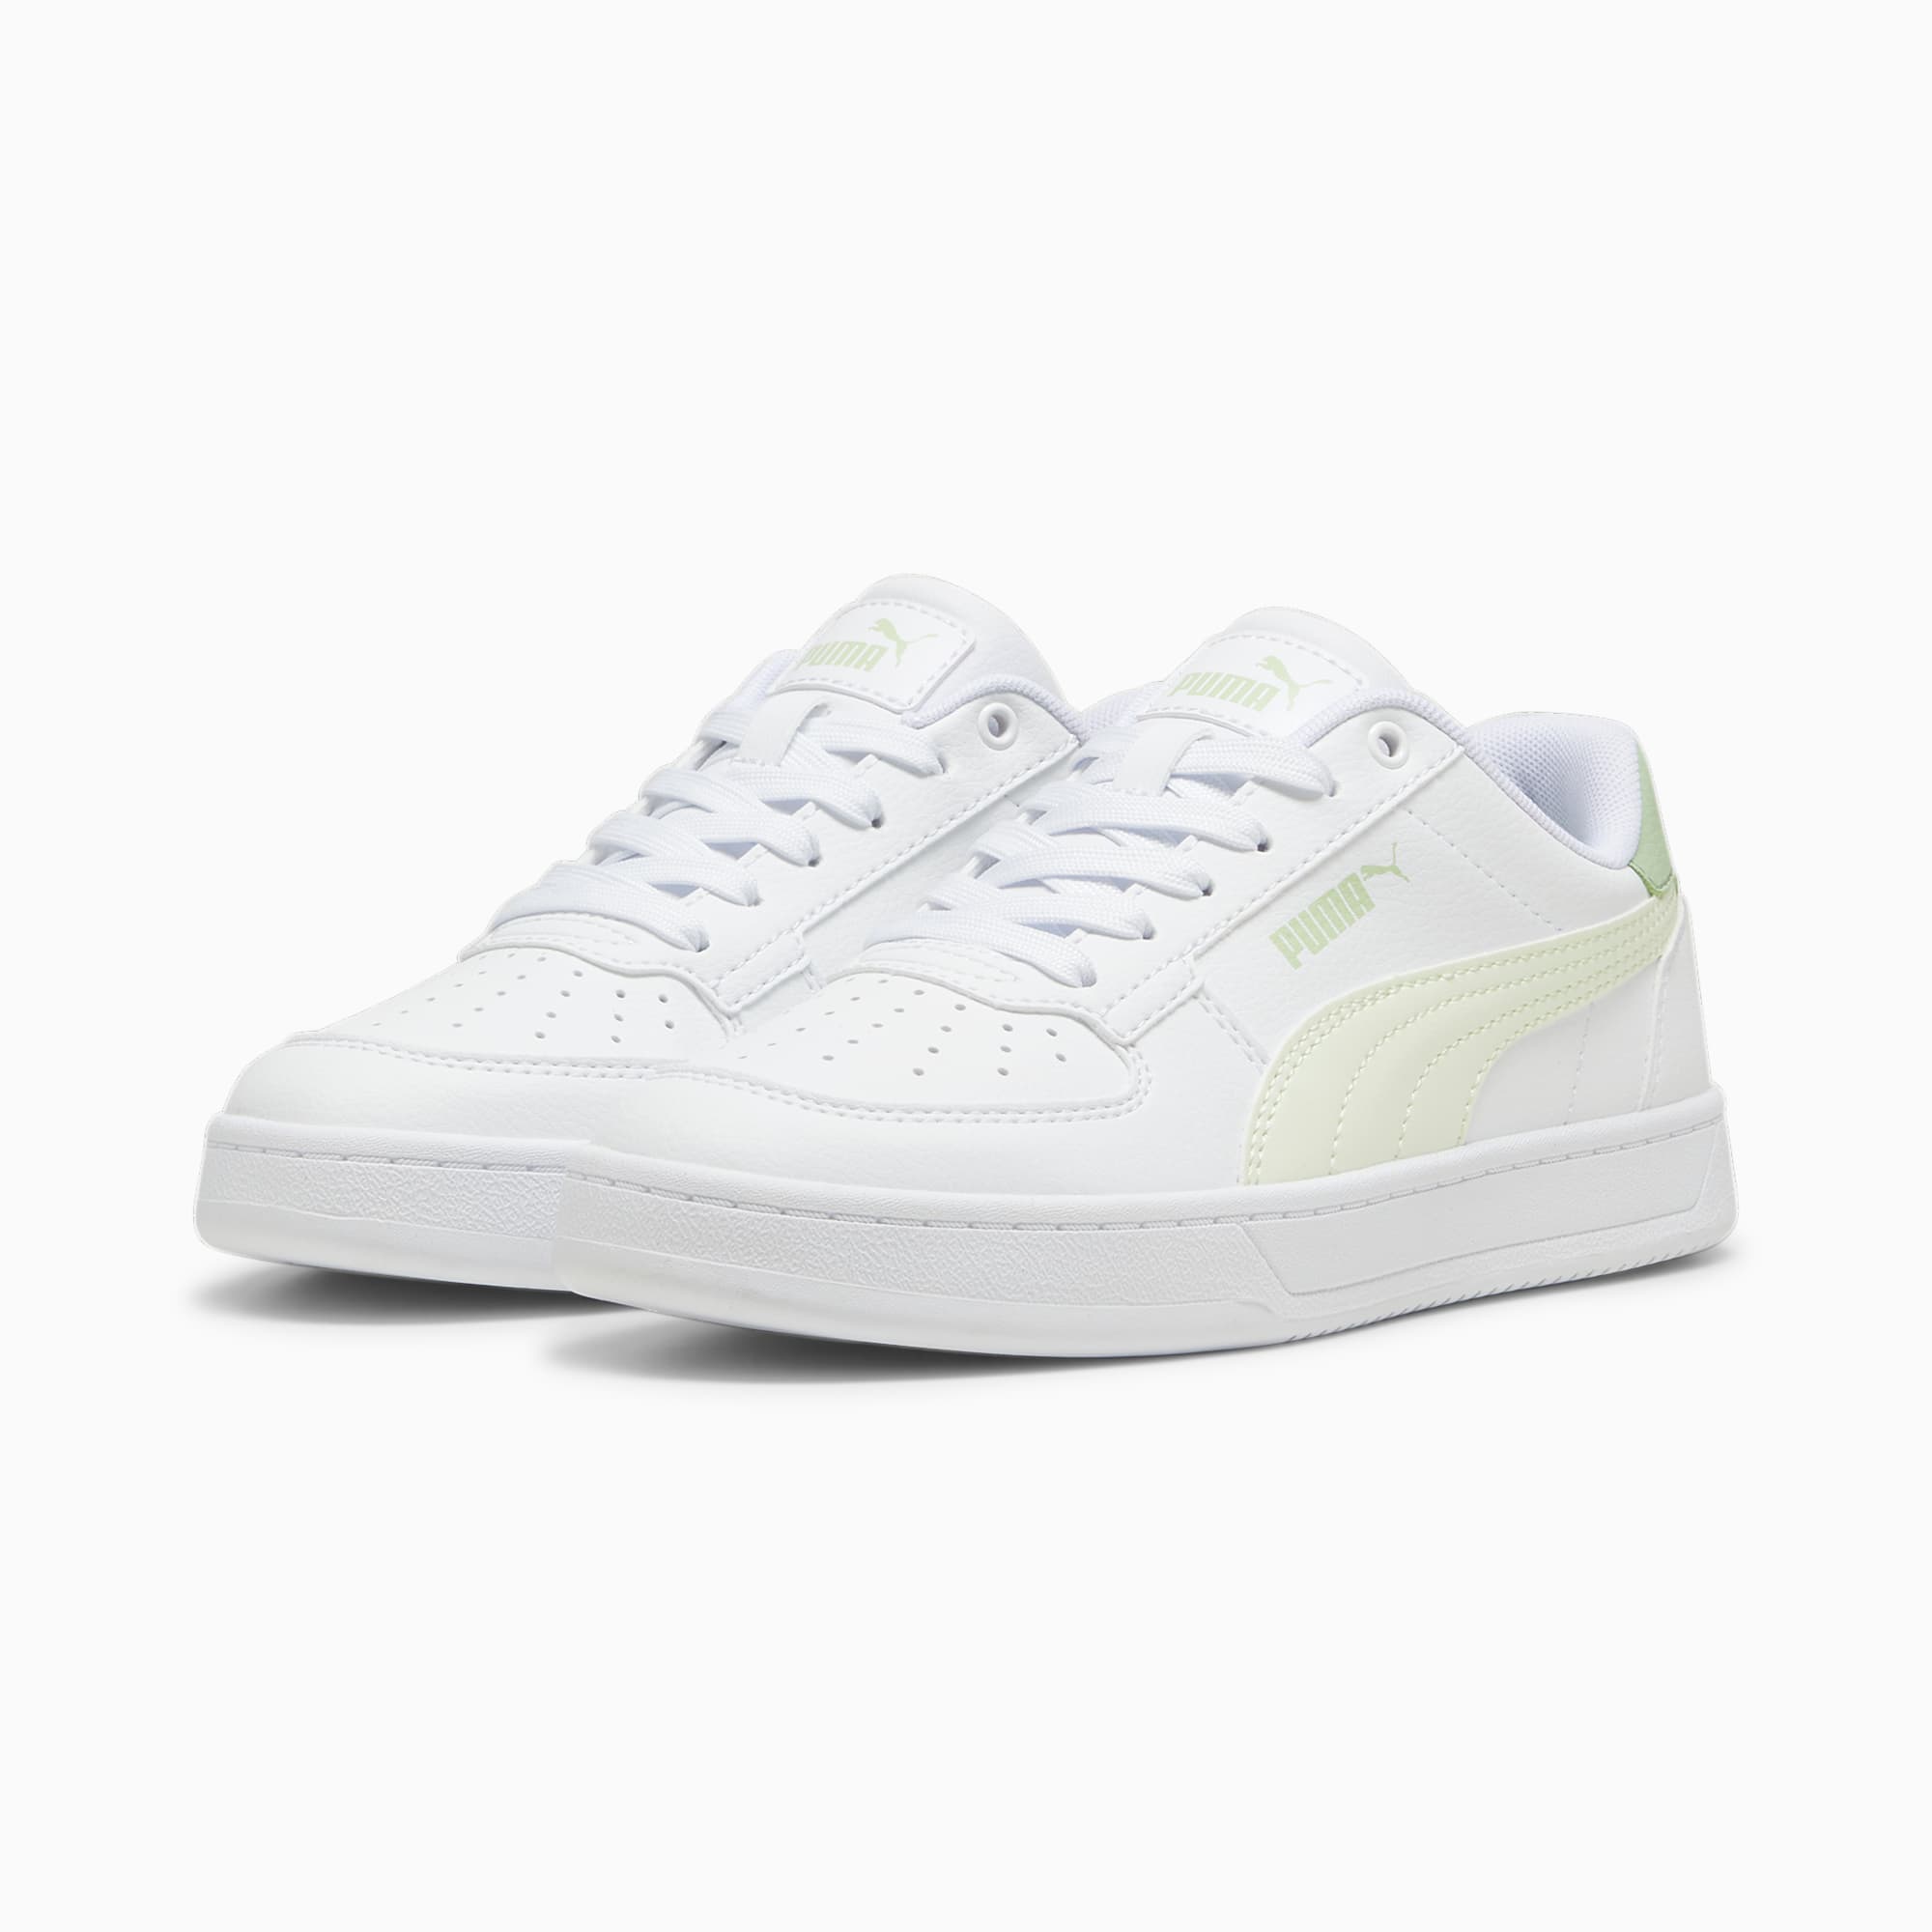 PUMA Caven 2.0 Youth Sneakers, White/Green Illusion/Pure Green, Size 35,5, Shoes